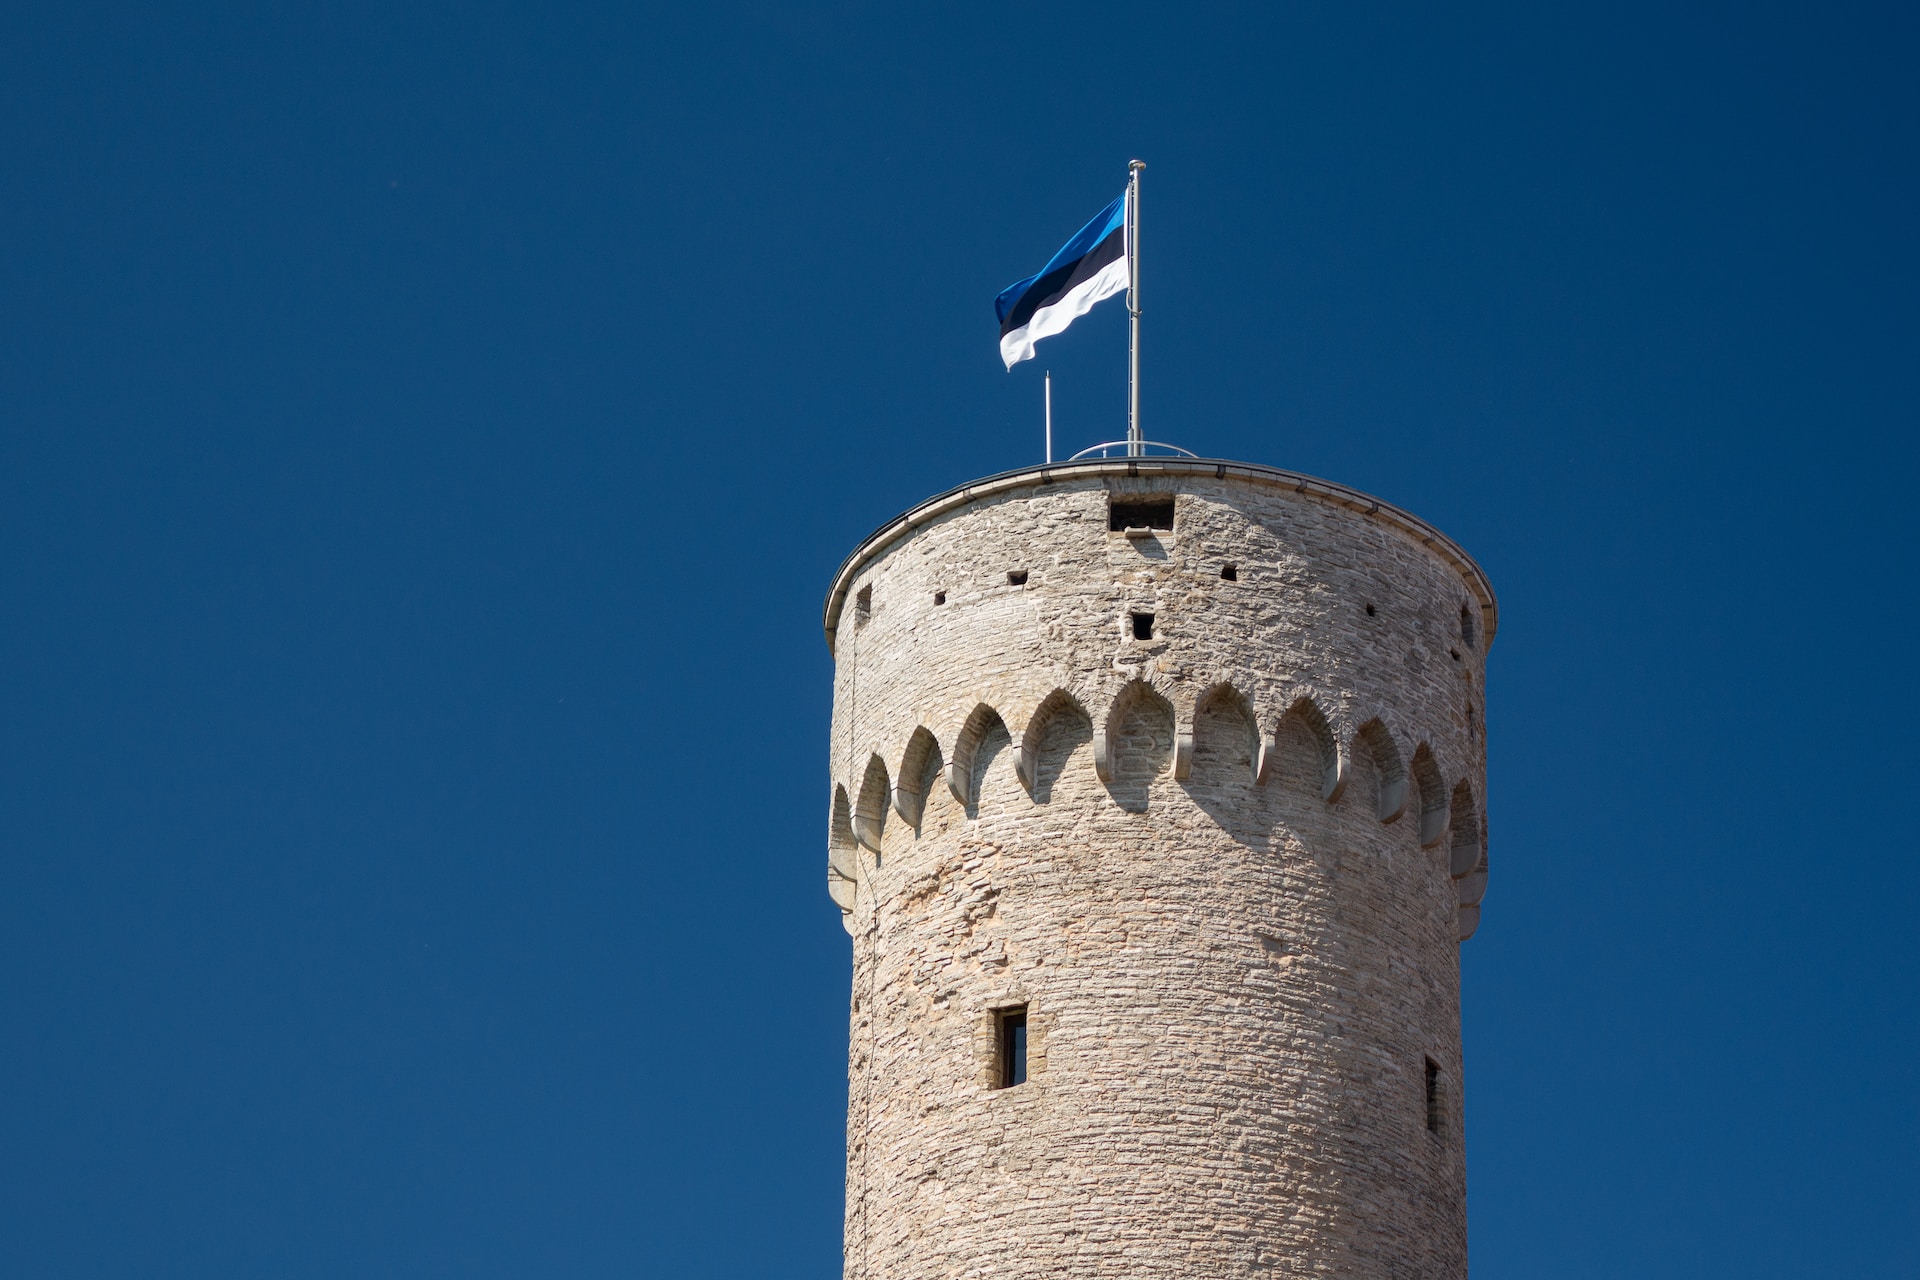 Expanding to Estonia. An article by the International Trade Council